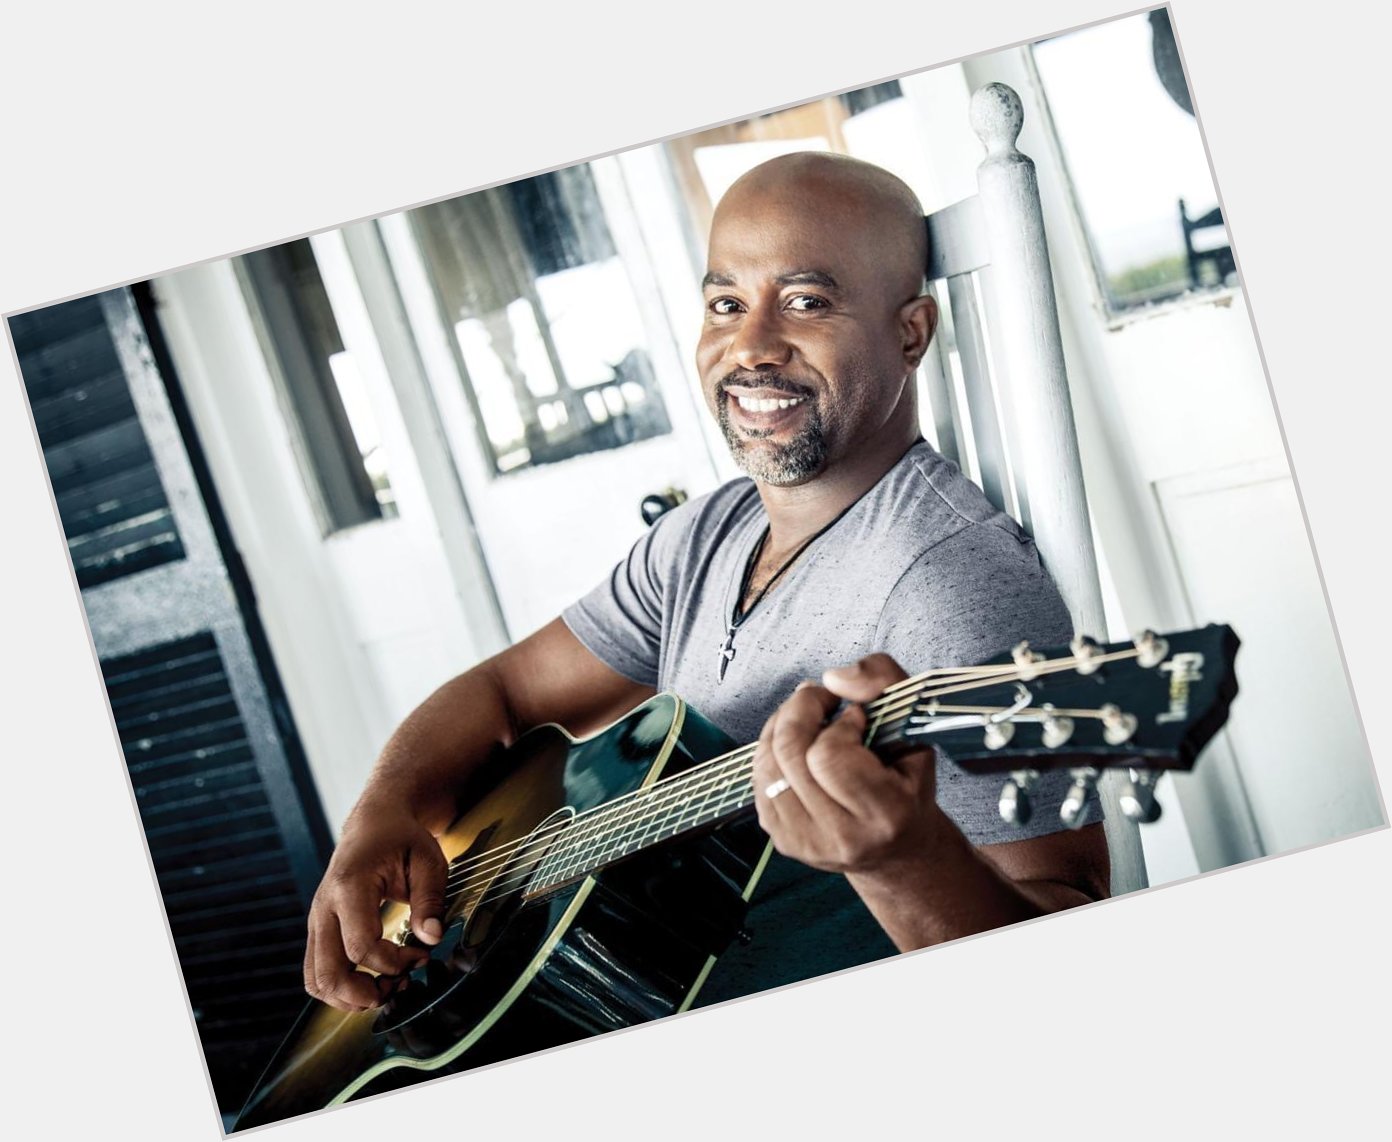 Happy 56th birthday to Darius Rucker. I love his music!! Saw him a few years ago and he was fantastic! 